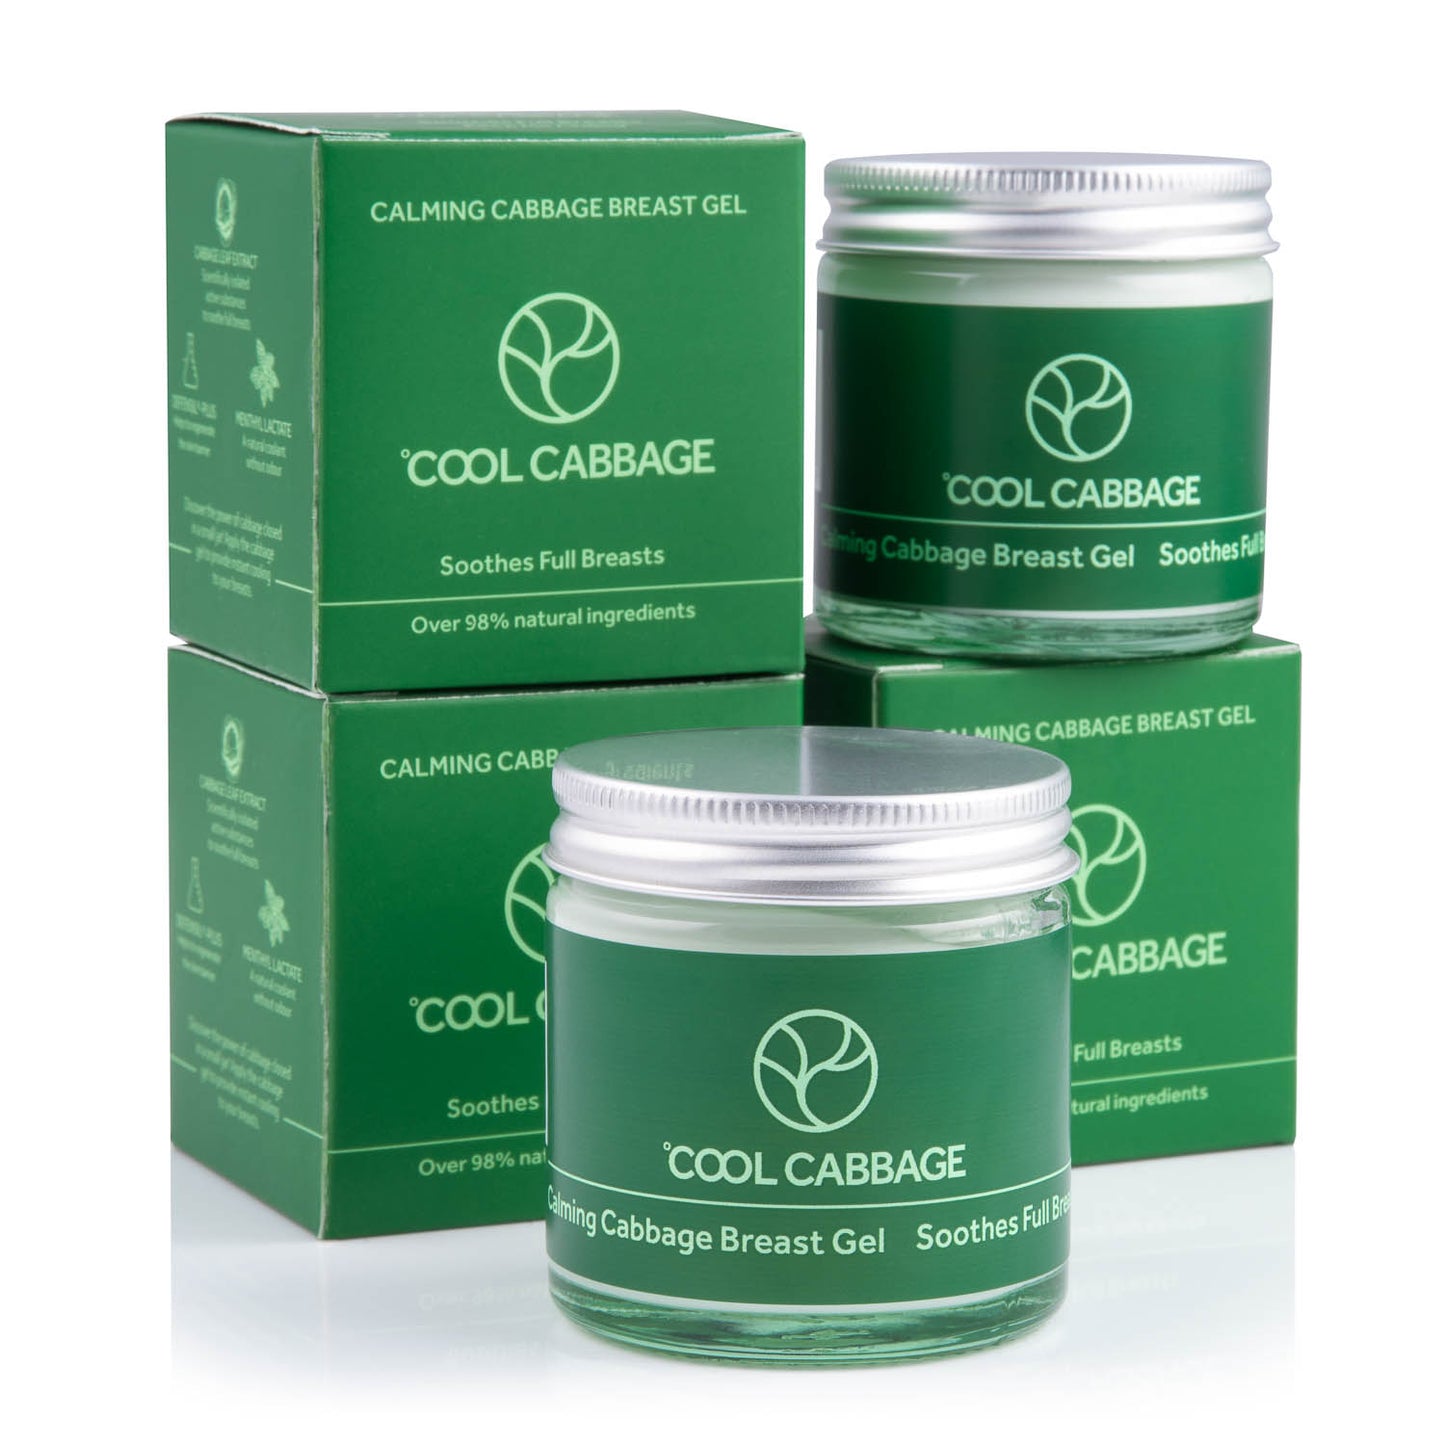 cabbage breast cream for pregnancy and breastfeeding by Cool Cabbage